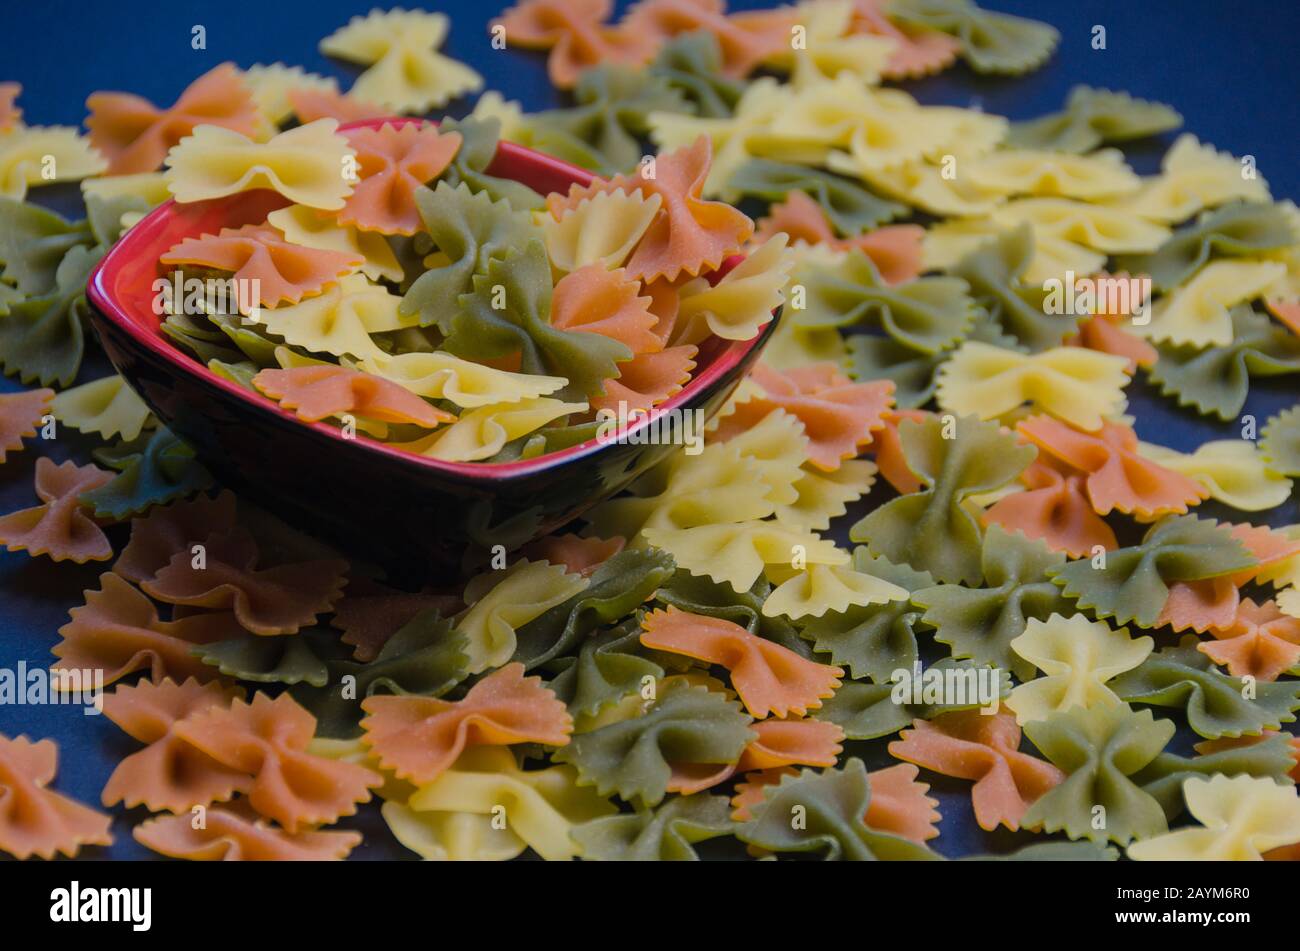 Pile of multicolored bow tie pasta on a blue background Stock Photo